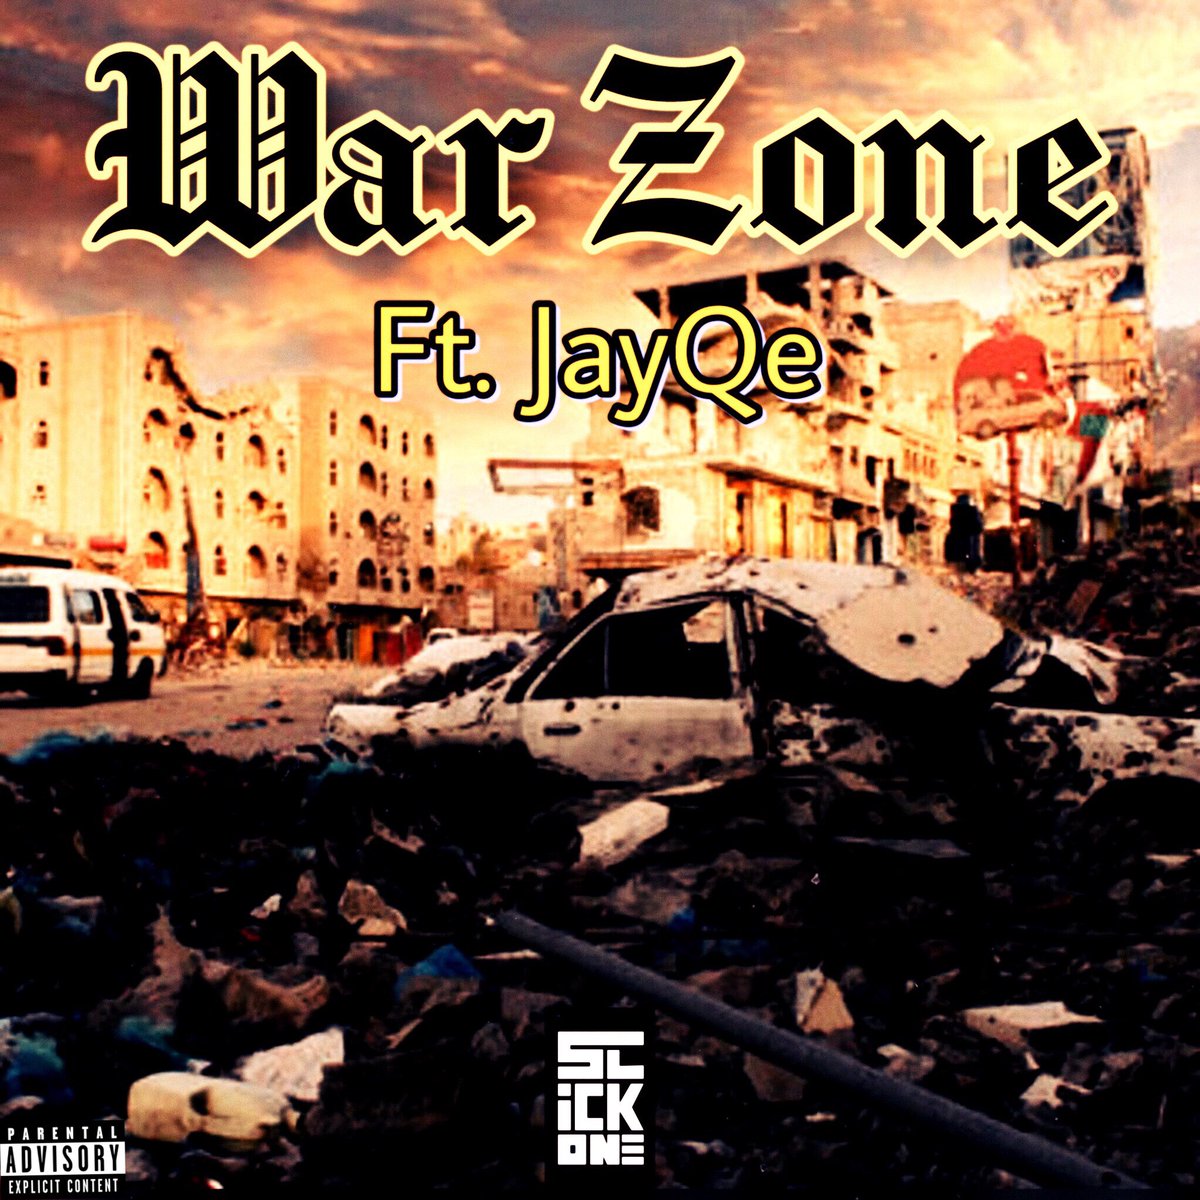 Another #SlickOneMusicFridays is upon us!! Listen to ”War Zone” Ft. @jayqethecity (Prod. @TheBoiHasTalent ) here - youtu.be/h8ySWOLwLe0?si… RT RT RT 🙏🏾🇿🇲 #ZedX @selfstyledking @Slick_ZM @DominicMboo_ @tonytheegoon @NameIsEvans @DuncanSodala @fanatik_Lochead